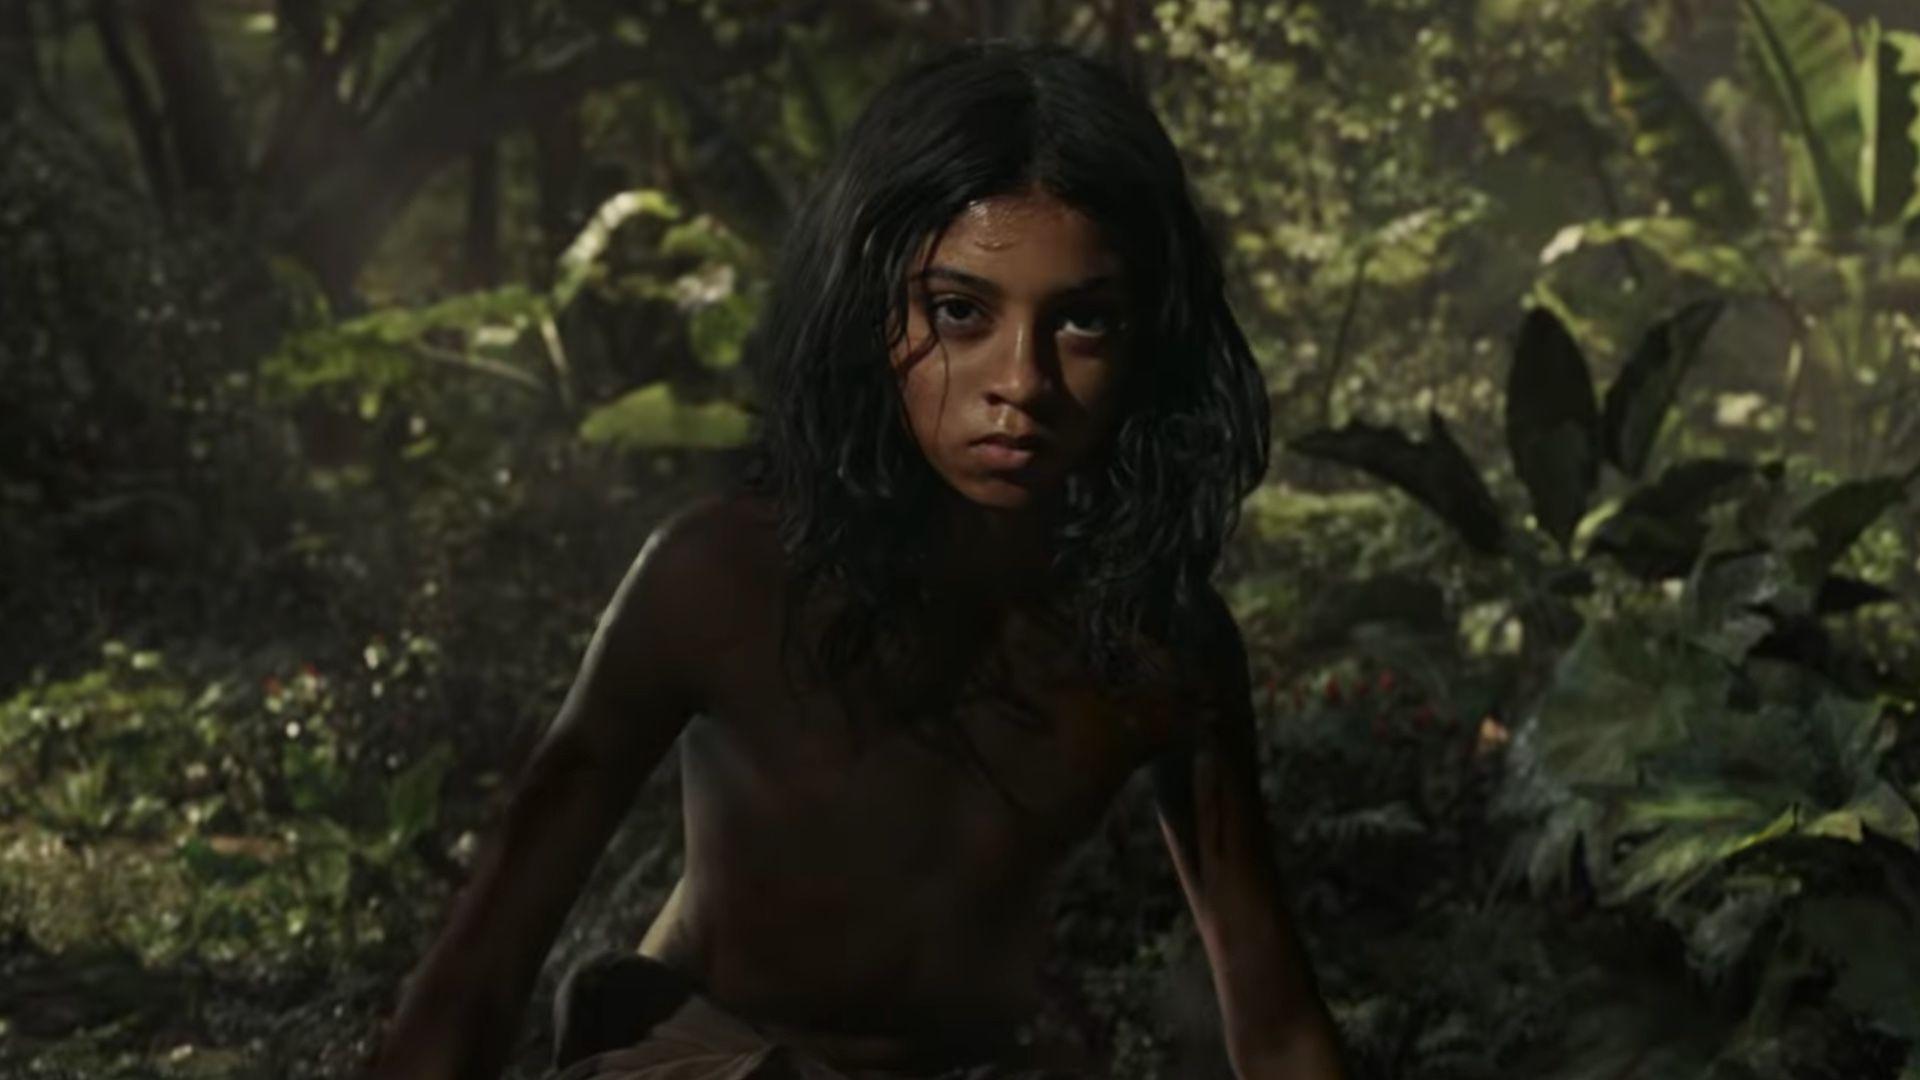 First For The Andy Serkis Directed Jungle Book Movie MOWGLI